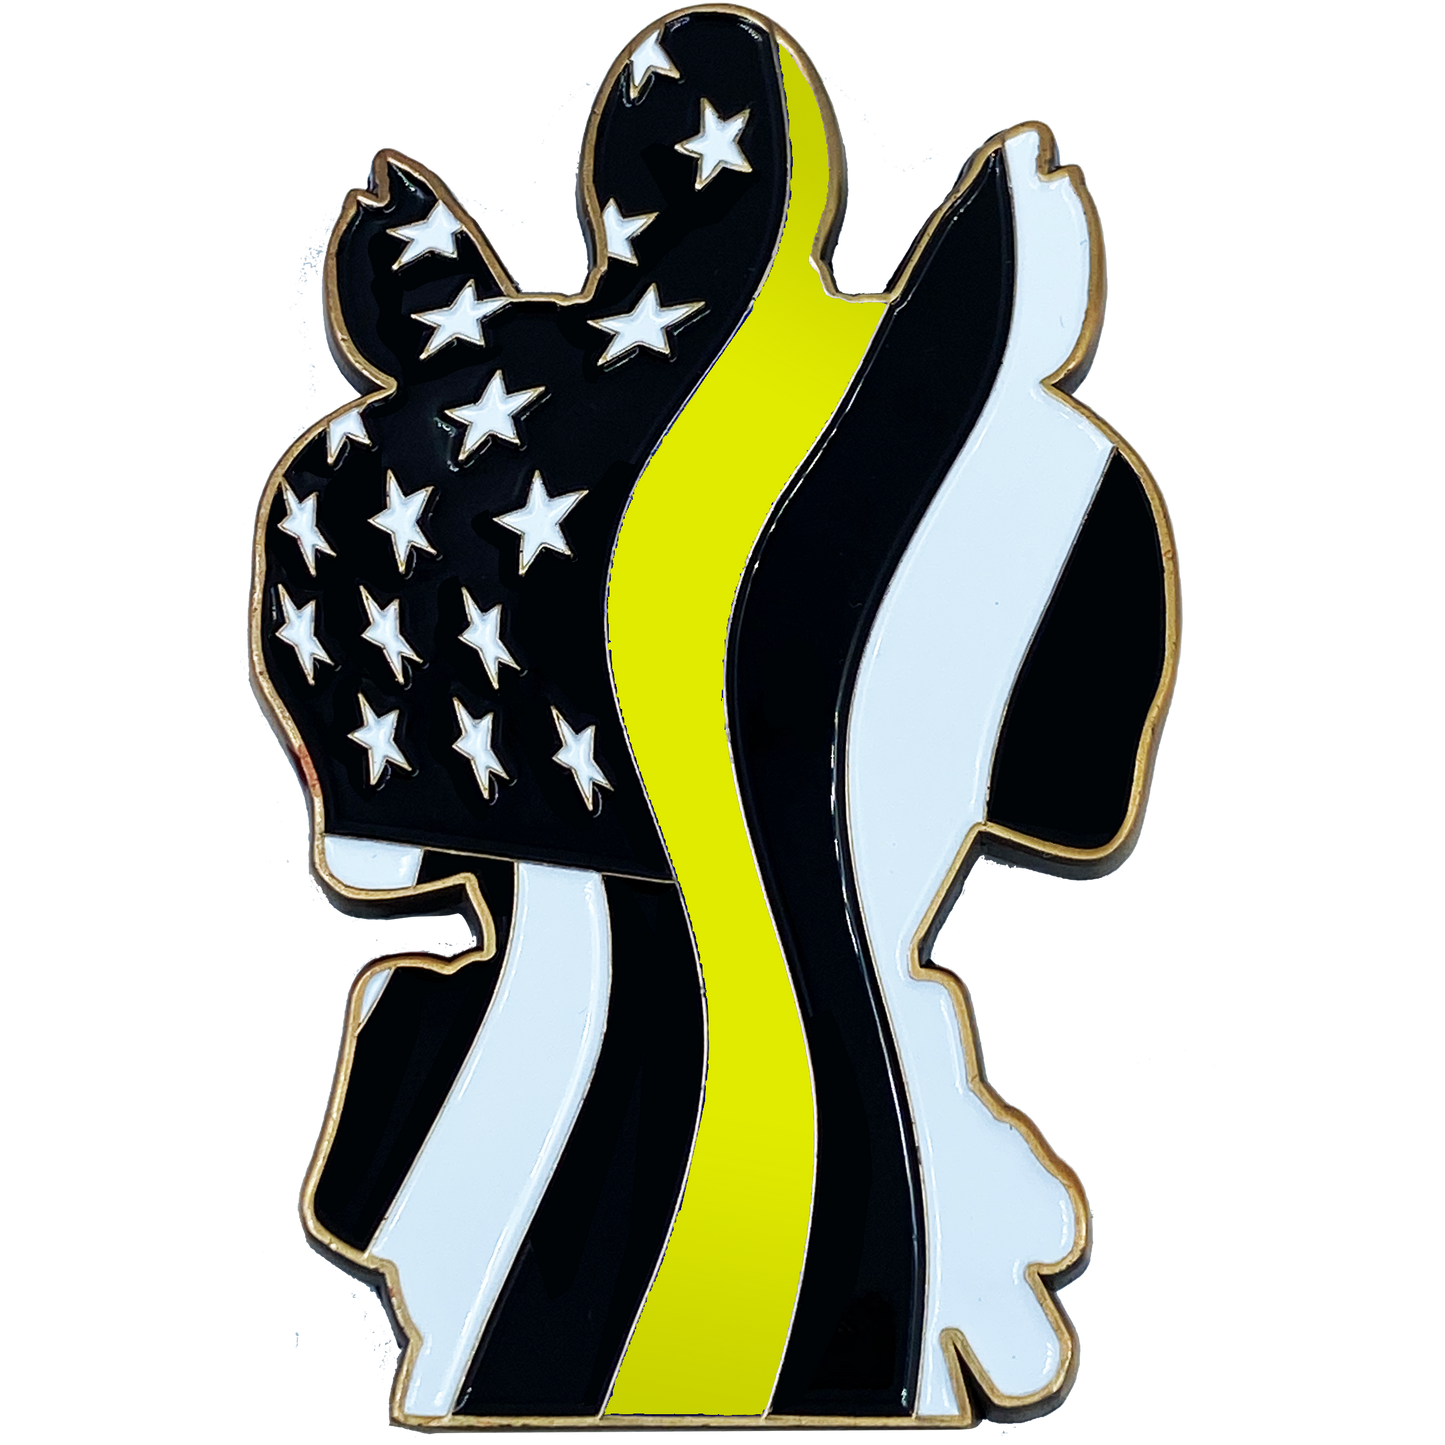 DL7-09 Deadpool inspired 911 Dispatcher Thin Gold Line Yellow